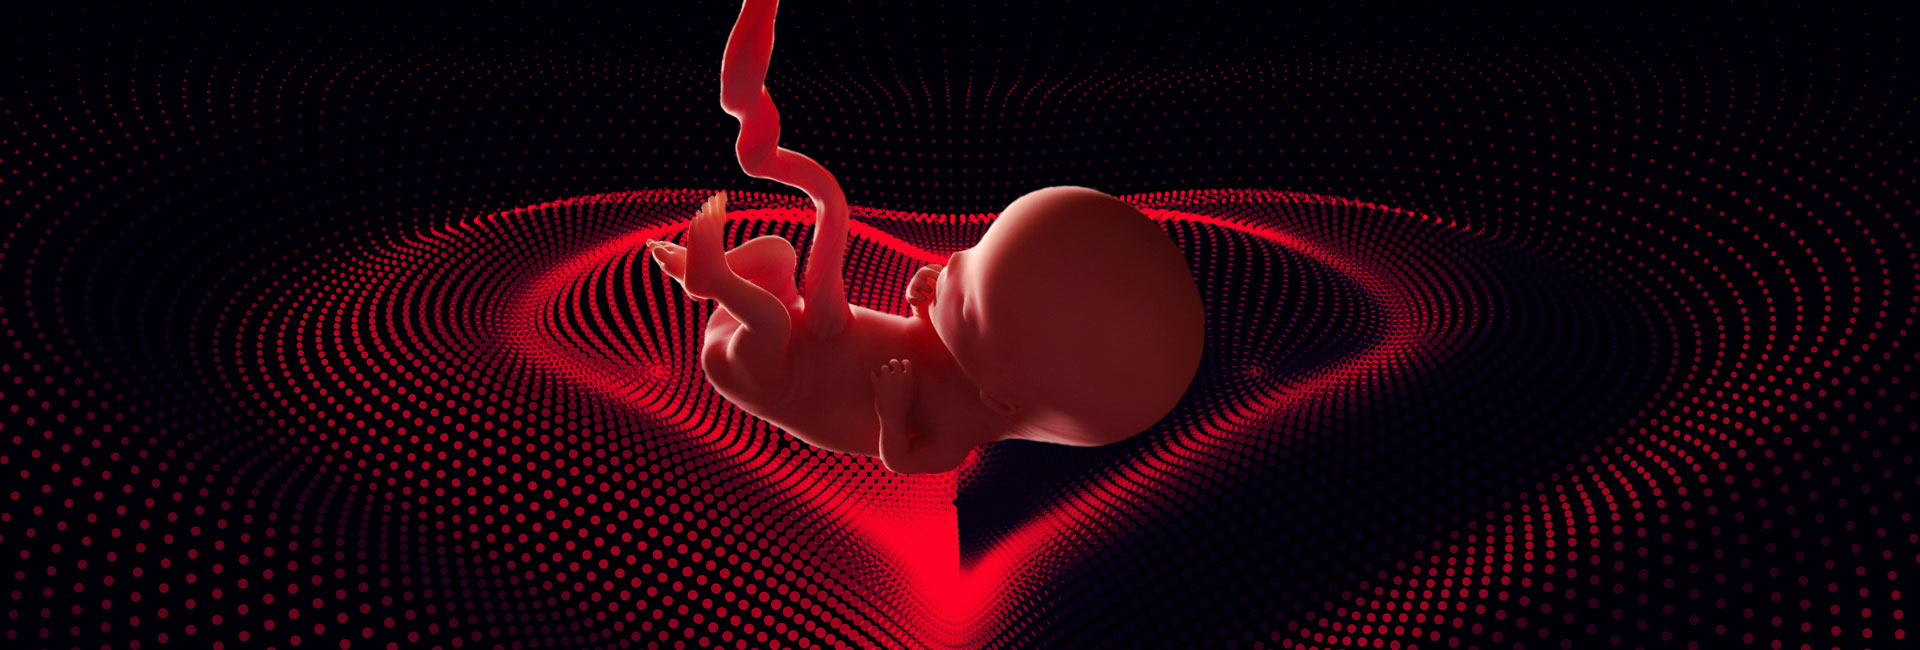 IN PERSON: Fetal Echo at First Trimester – EFS Conference